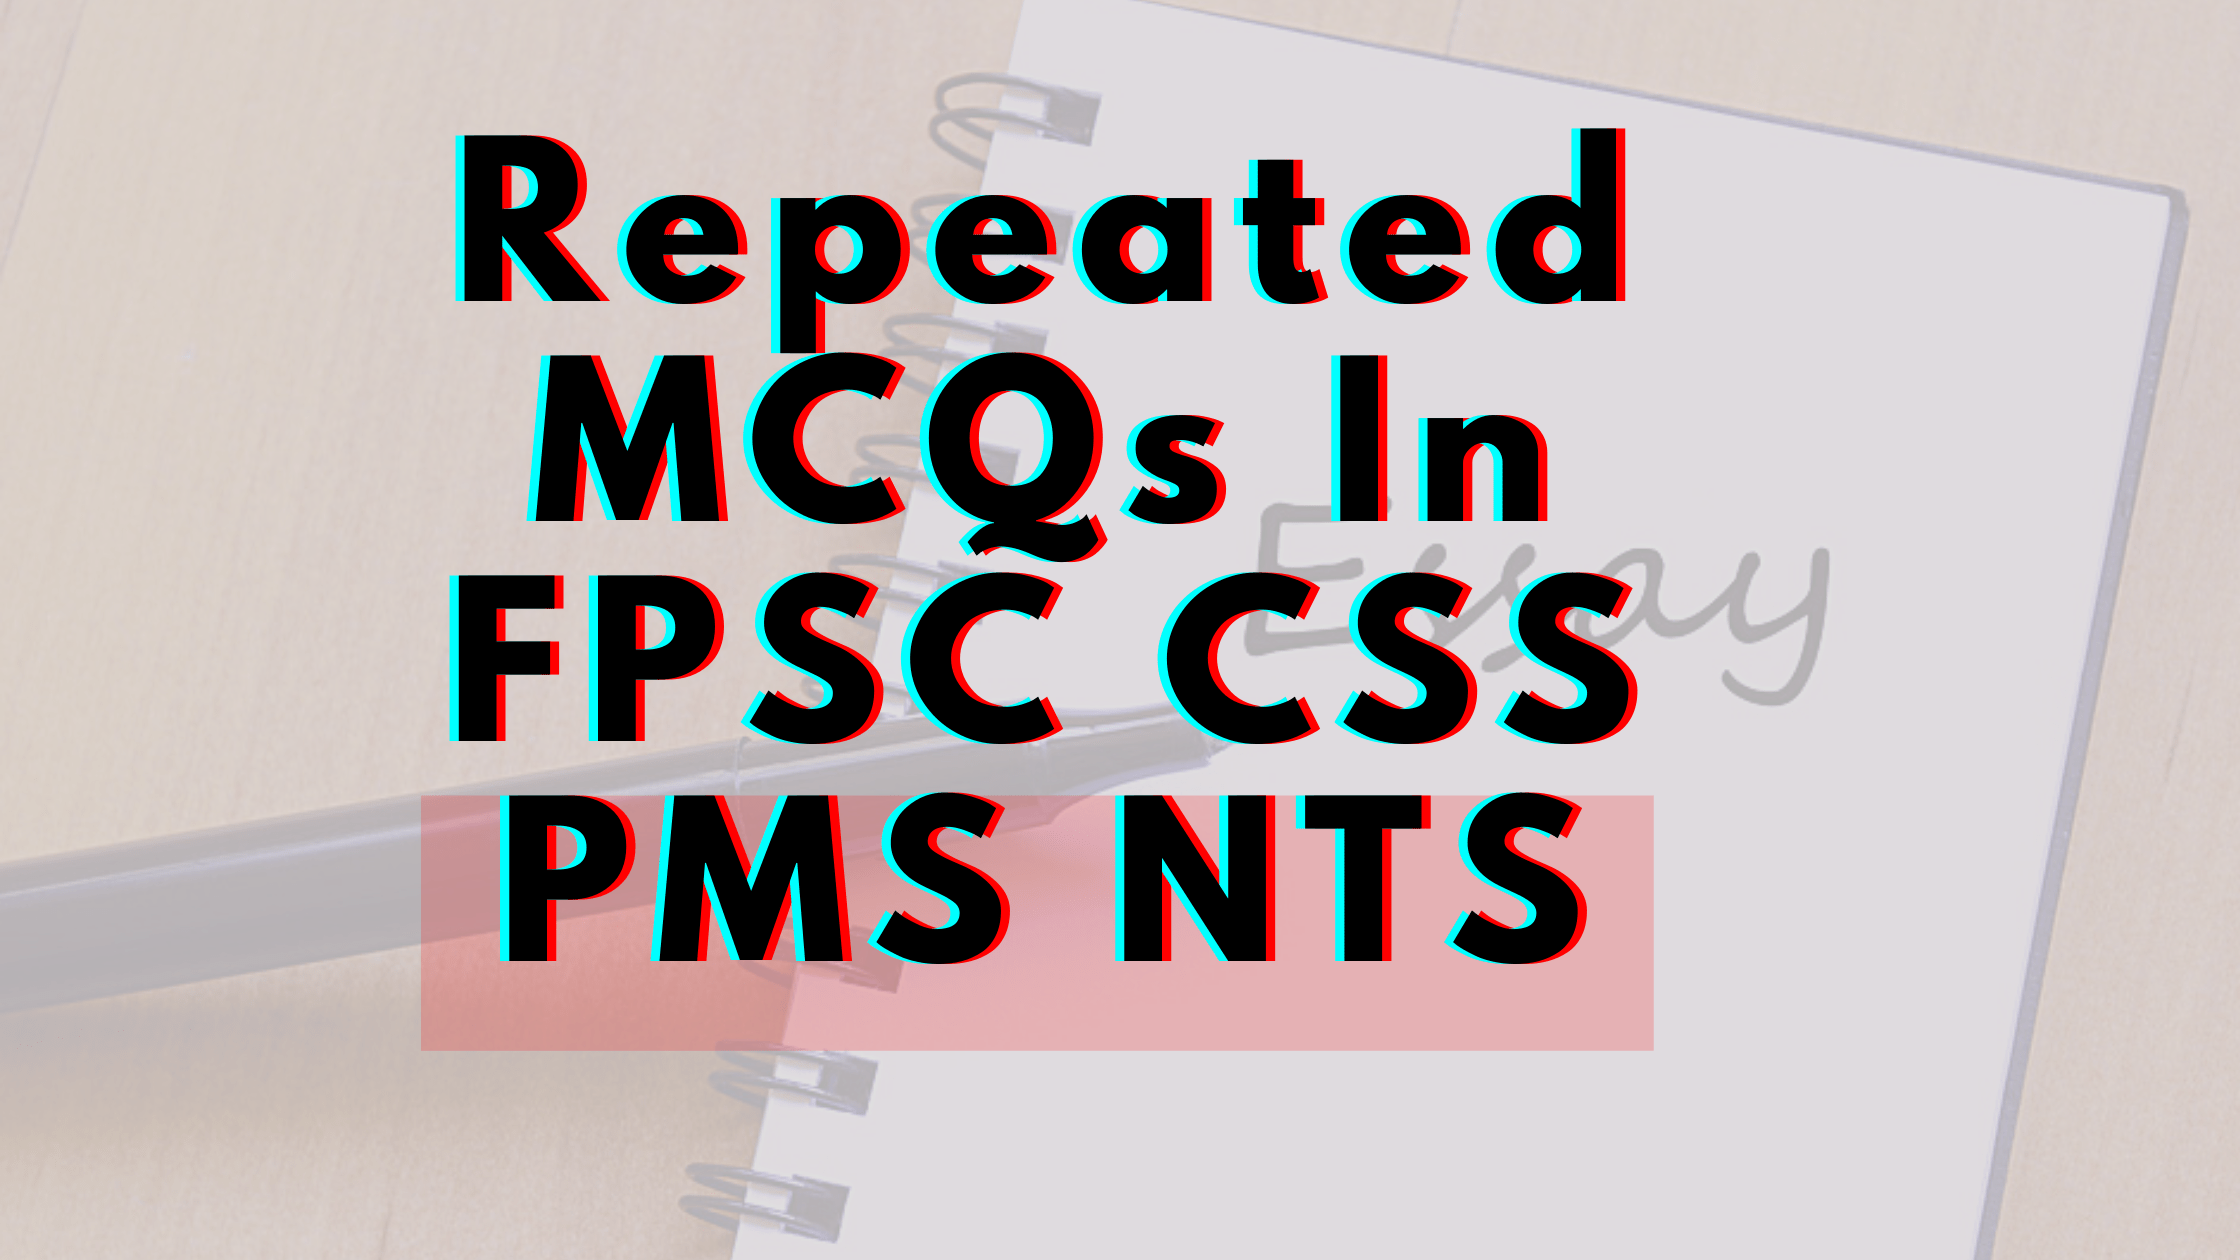 MOST REPEATED MCQS IN FPSC NTS PMS